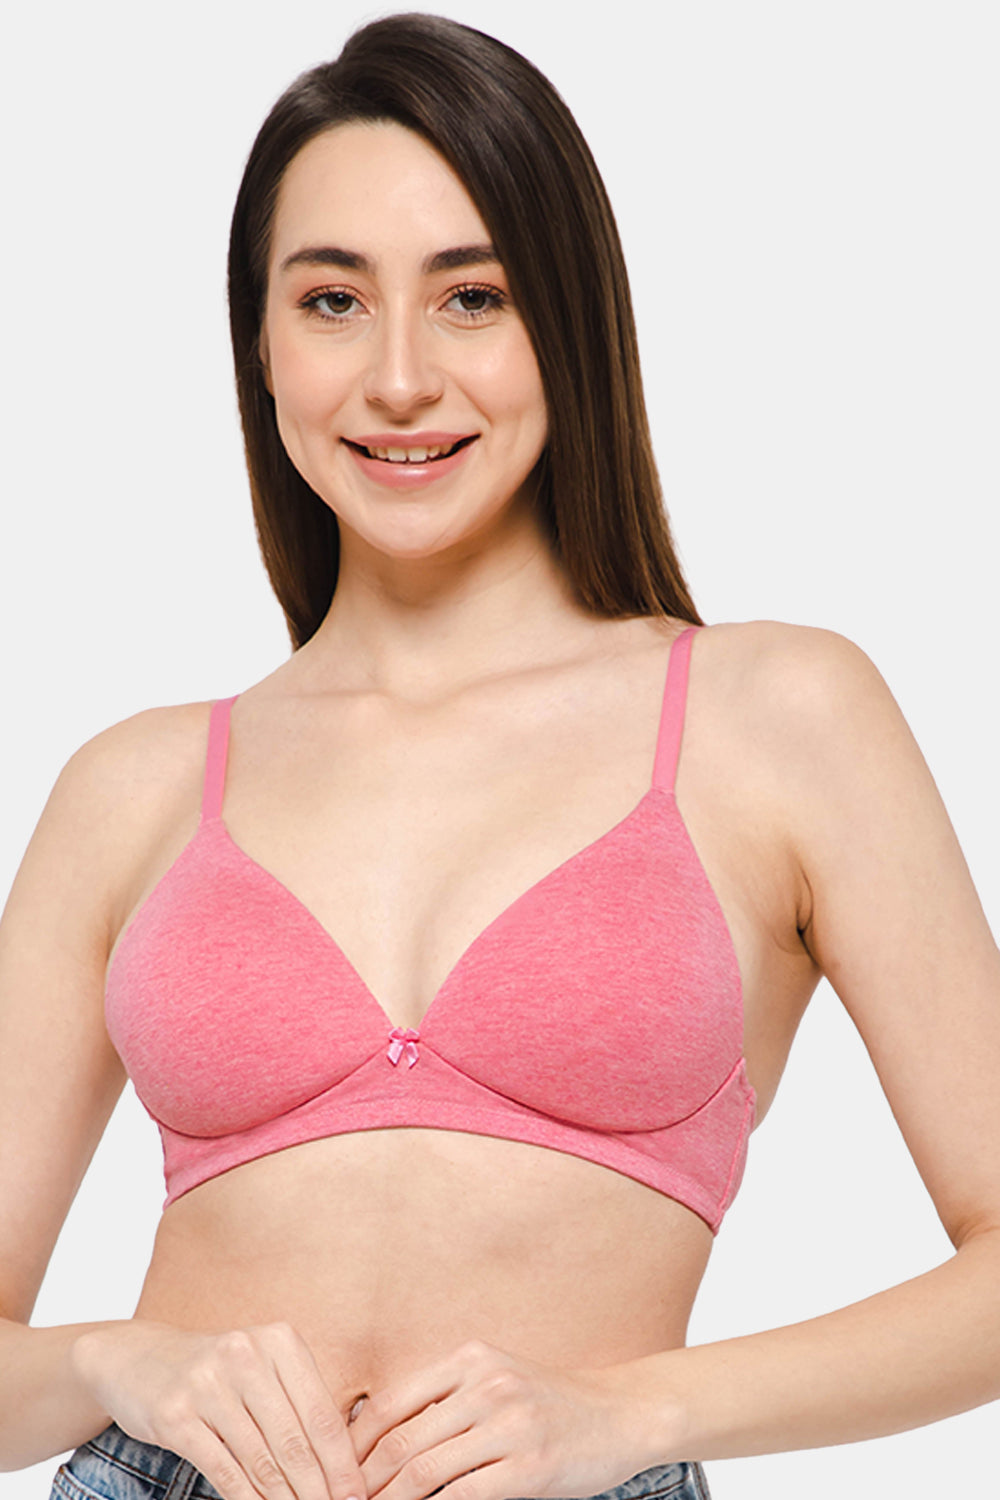 Bras For Deep Neck Blouses gal galleries